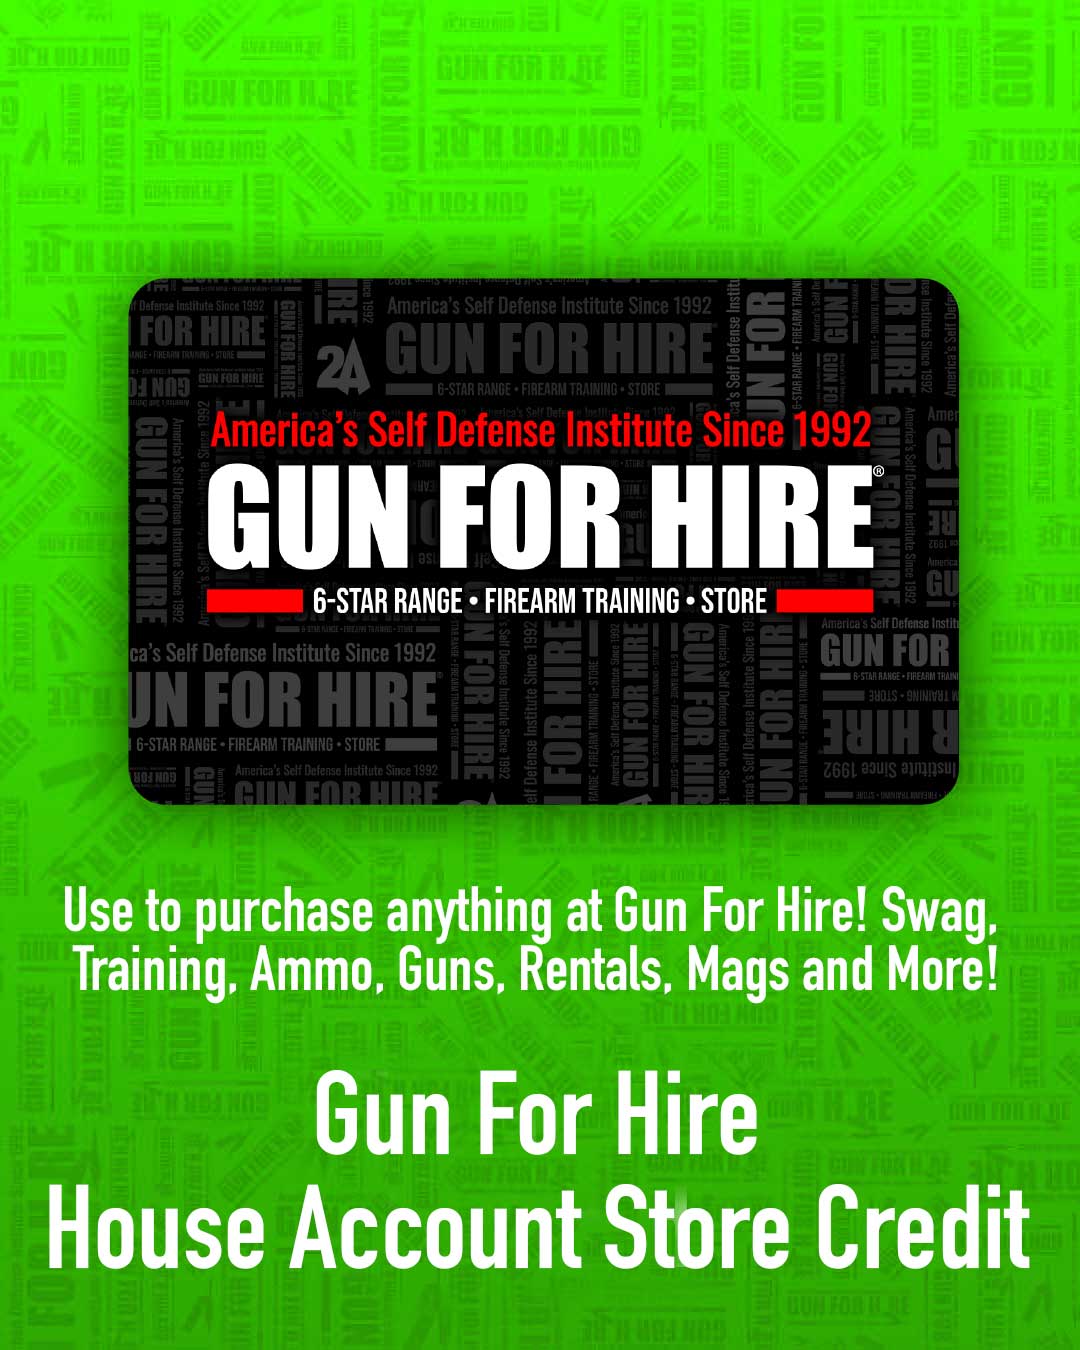 Gun For Hire Store House Credit - Gun For Hire